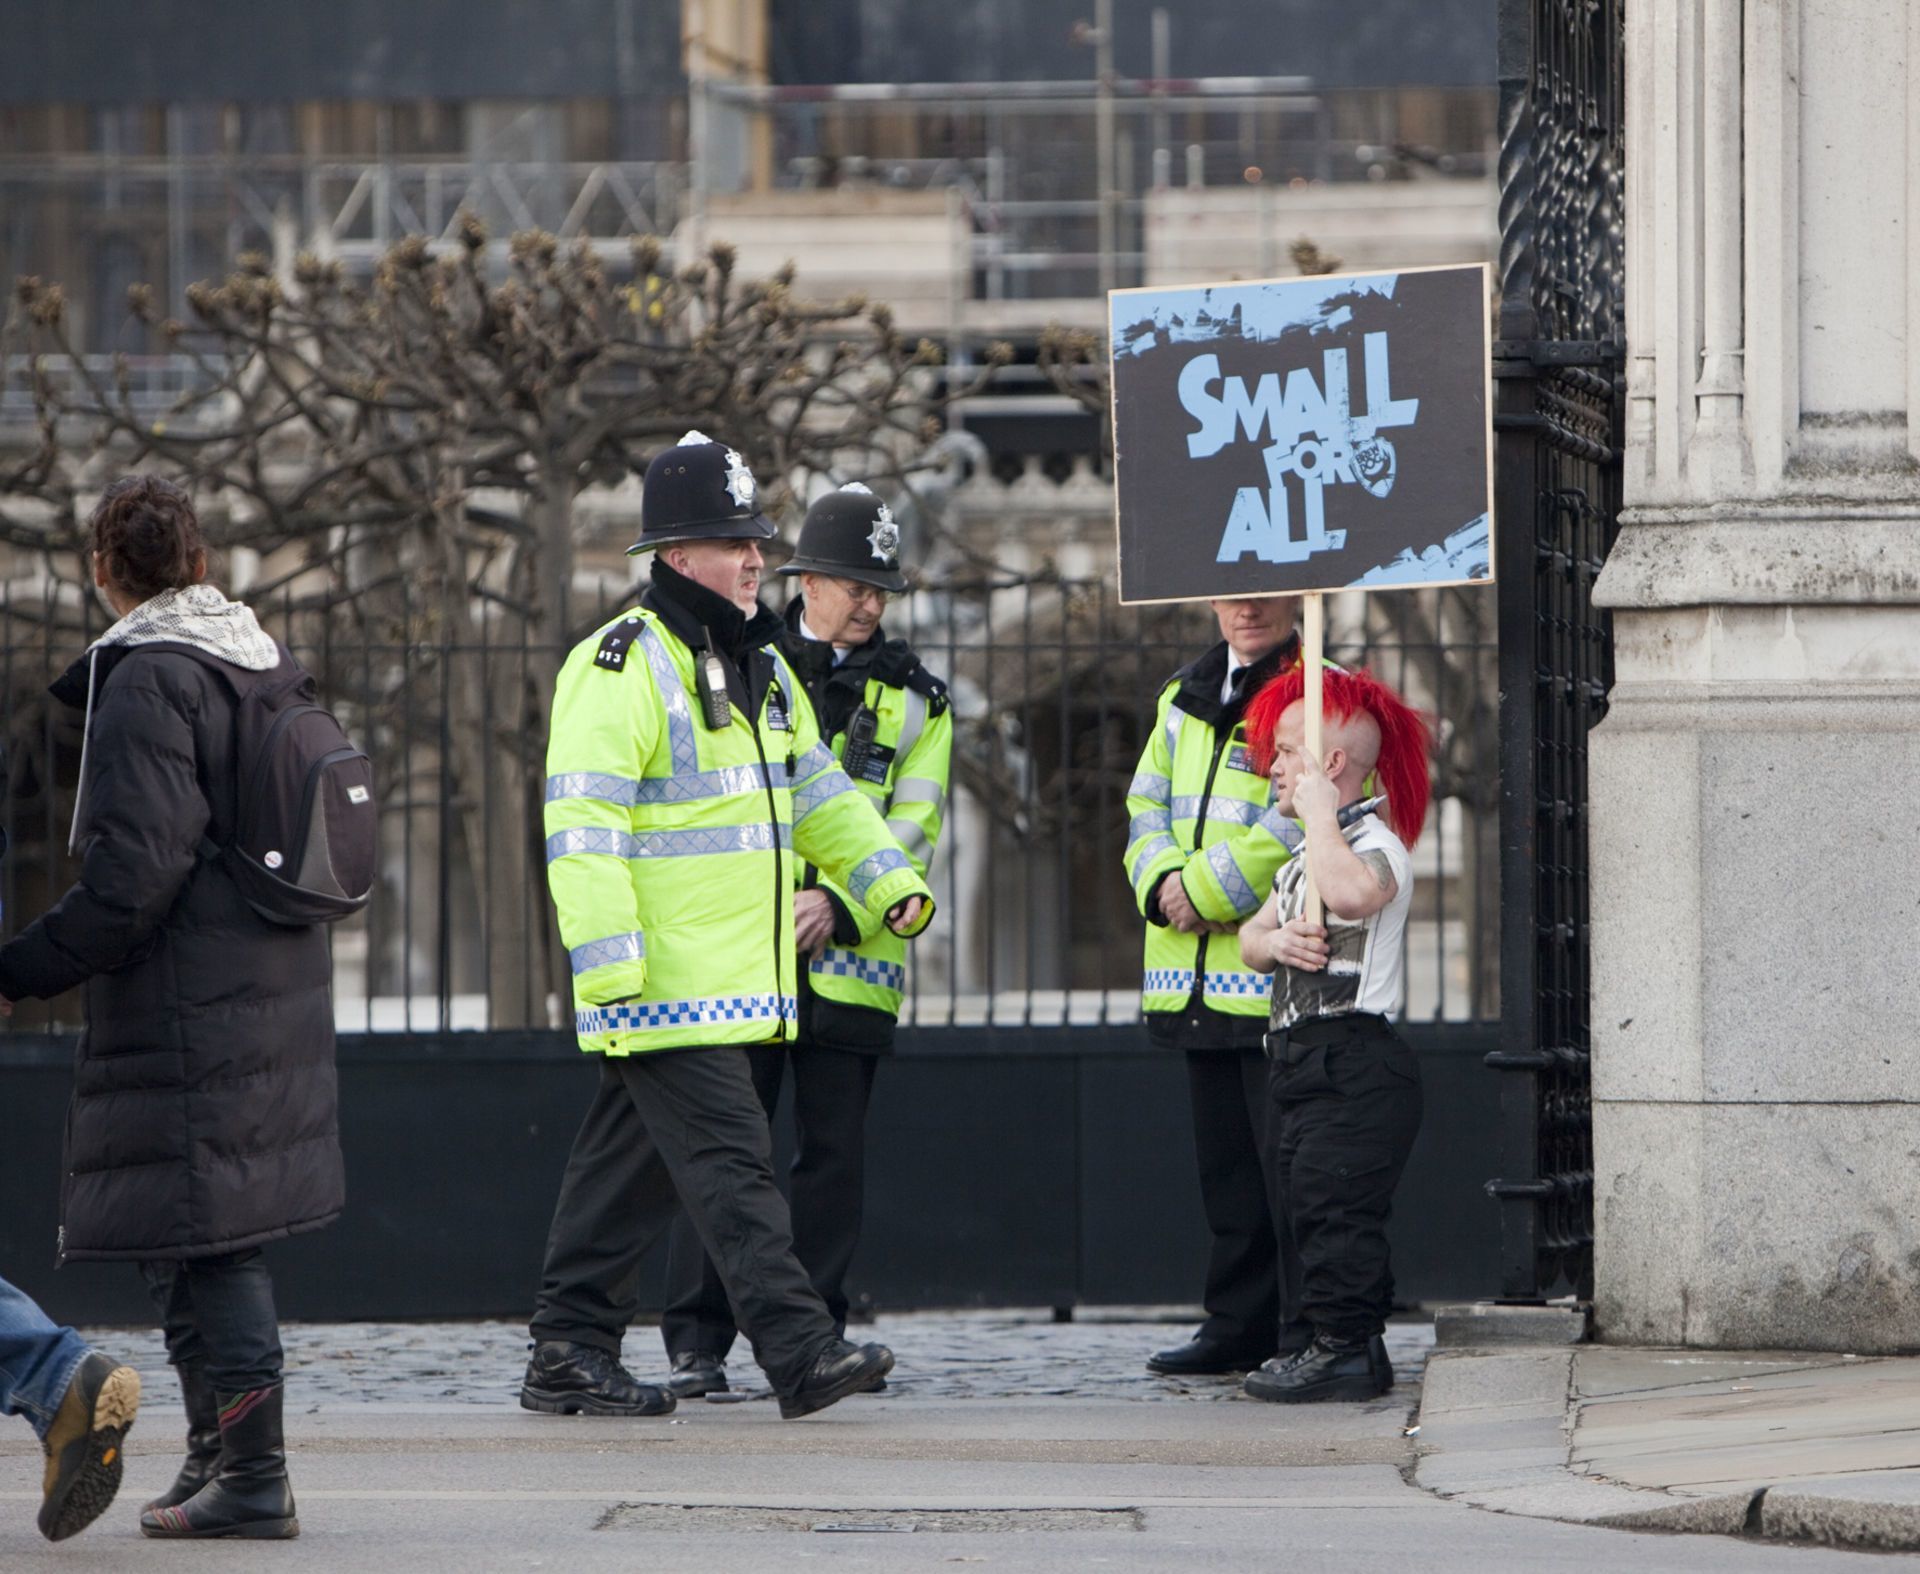 BrewDog's dwarf protest caused a scene at Westminster